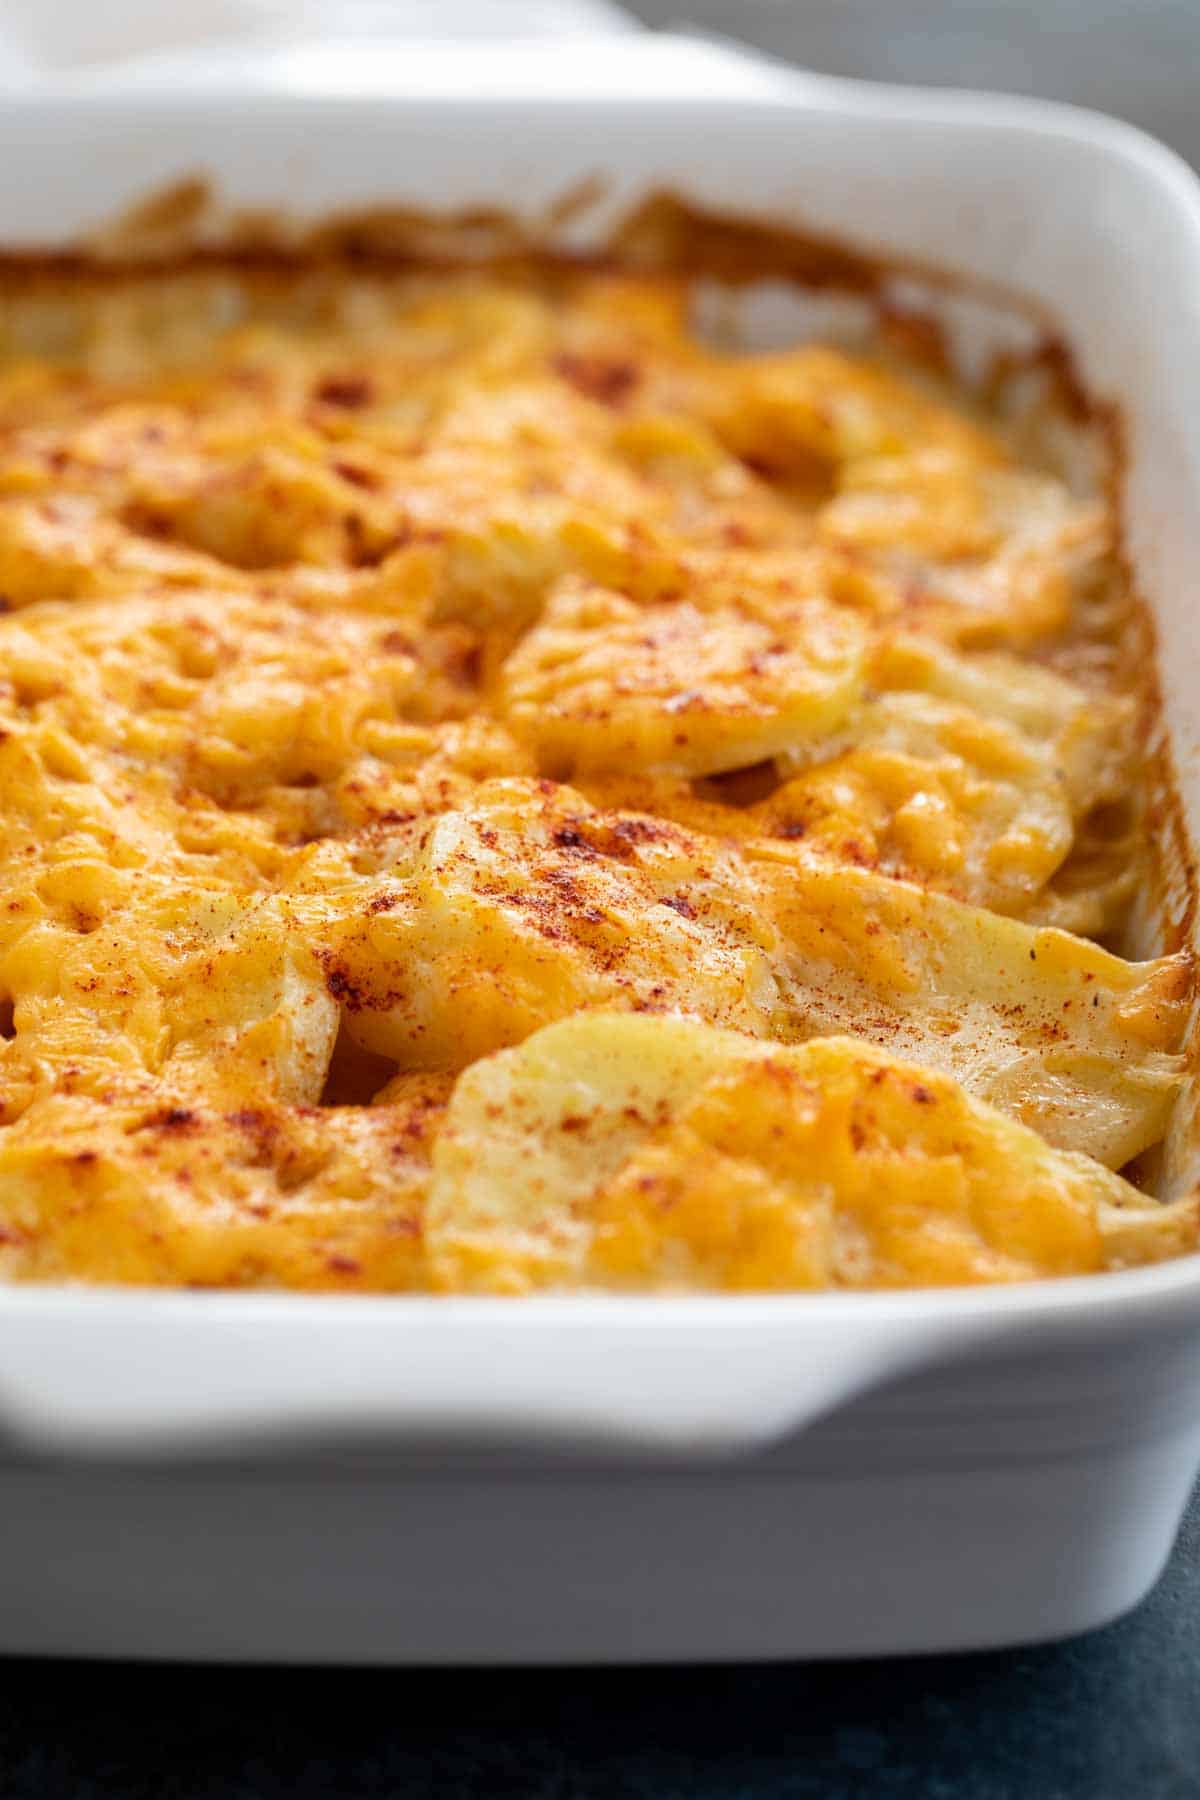 Scalloped Potatoes in a dish, sprinkled with paprika